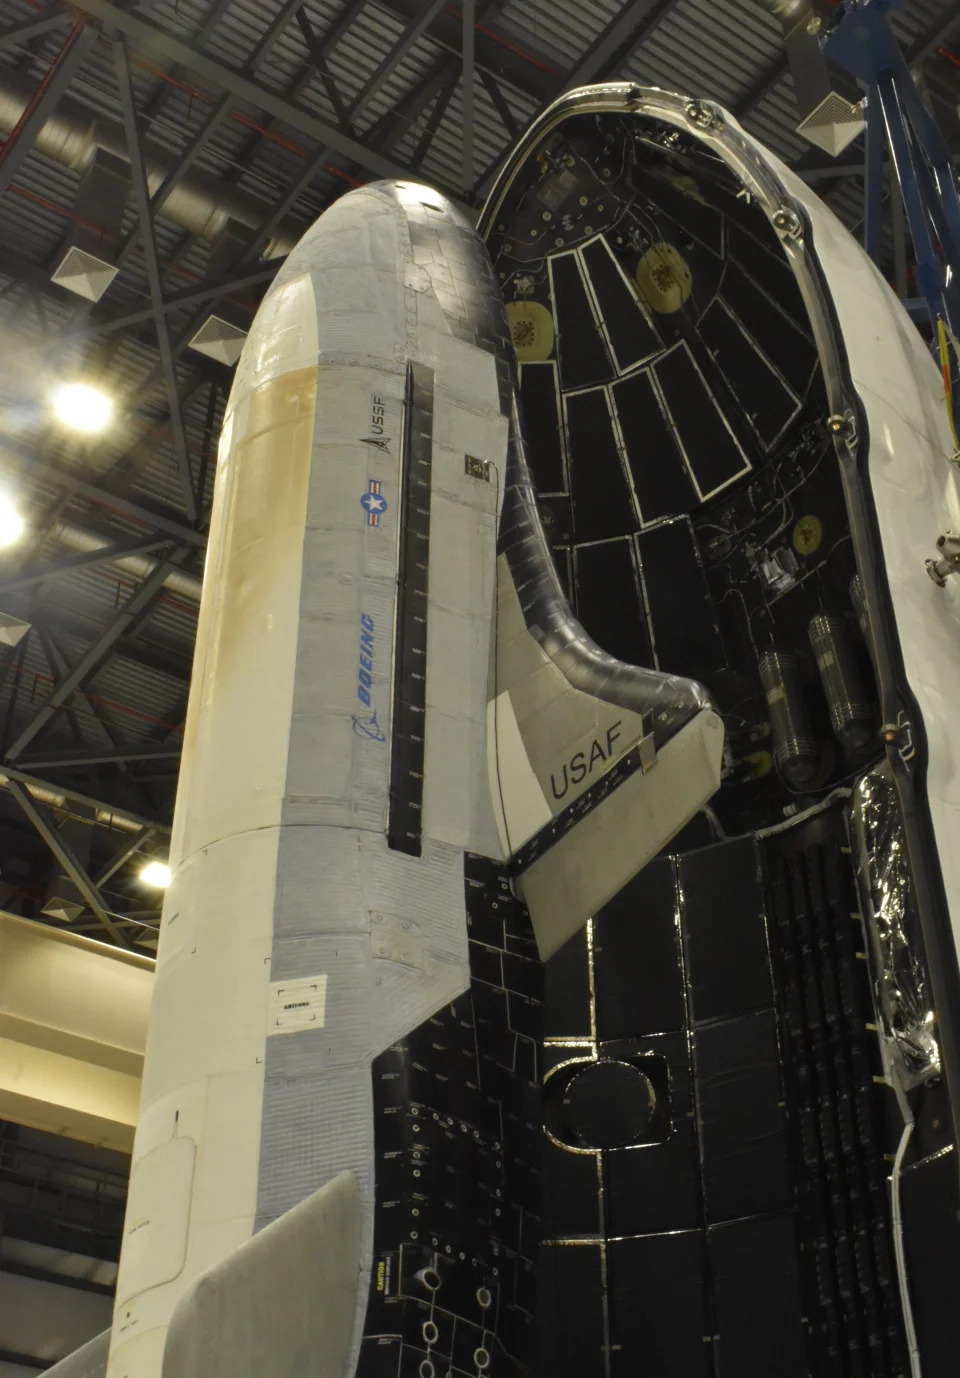 A picture shows the US Space Force X37B being loaded into its cargo hold.